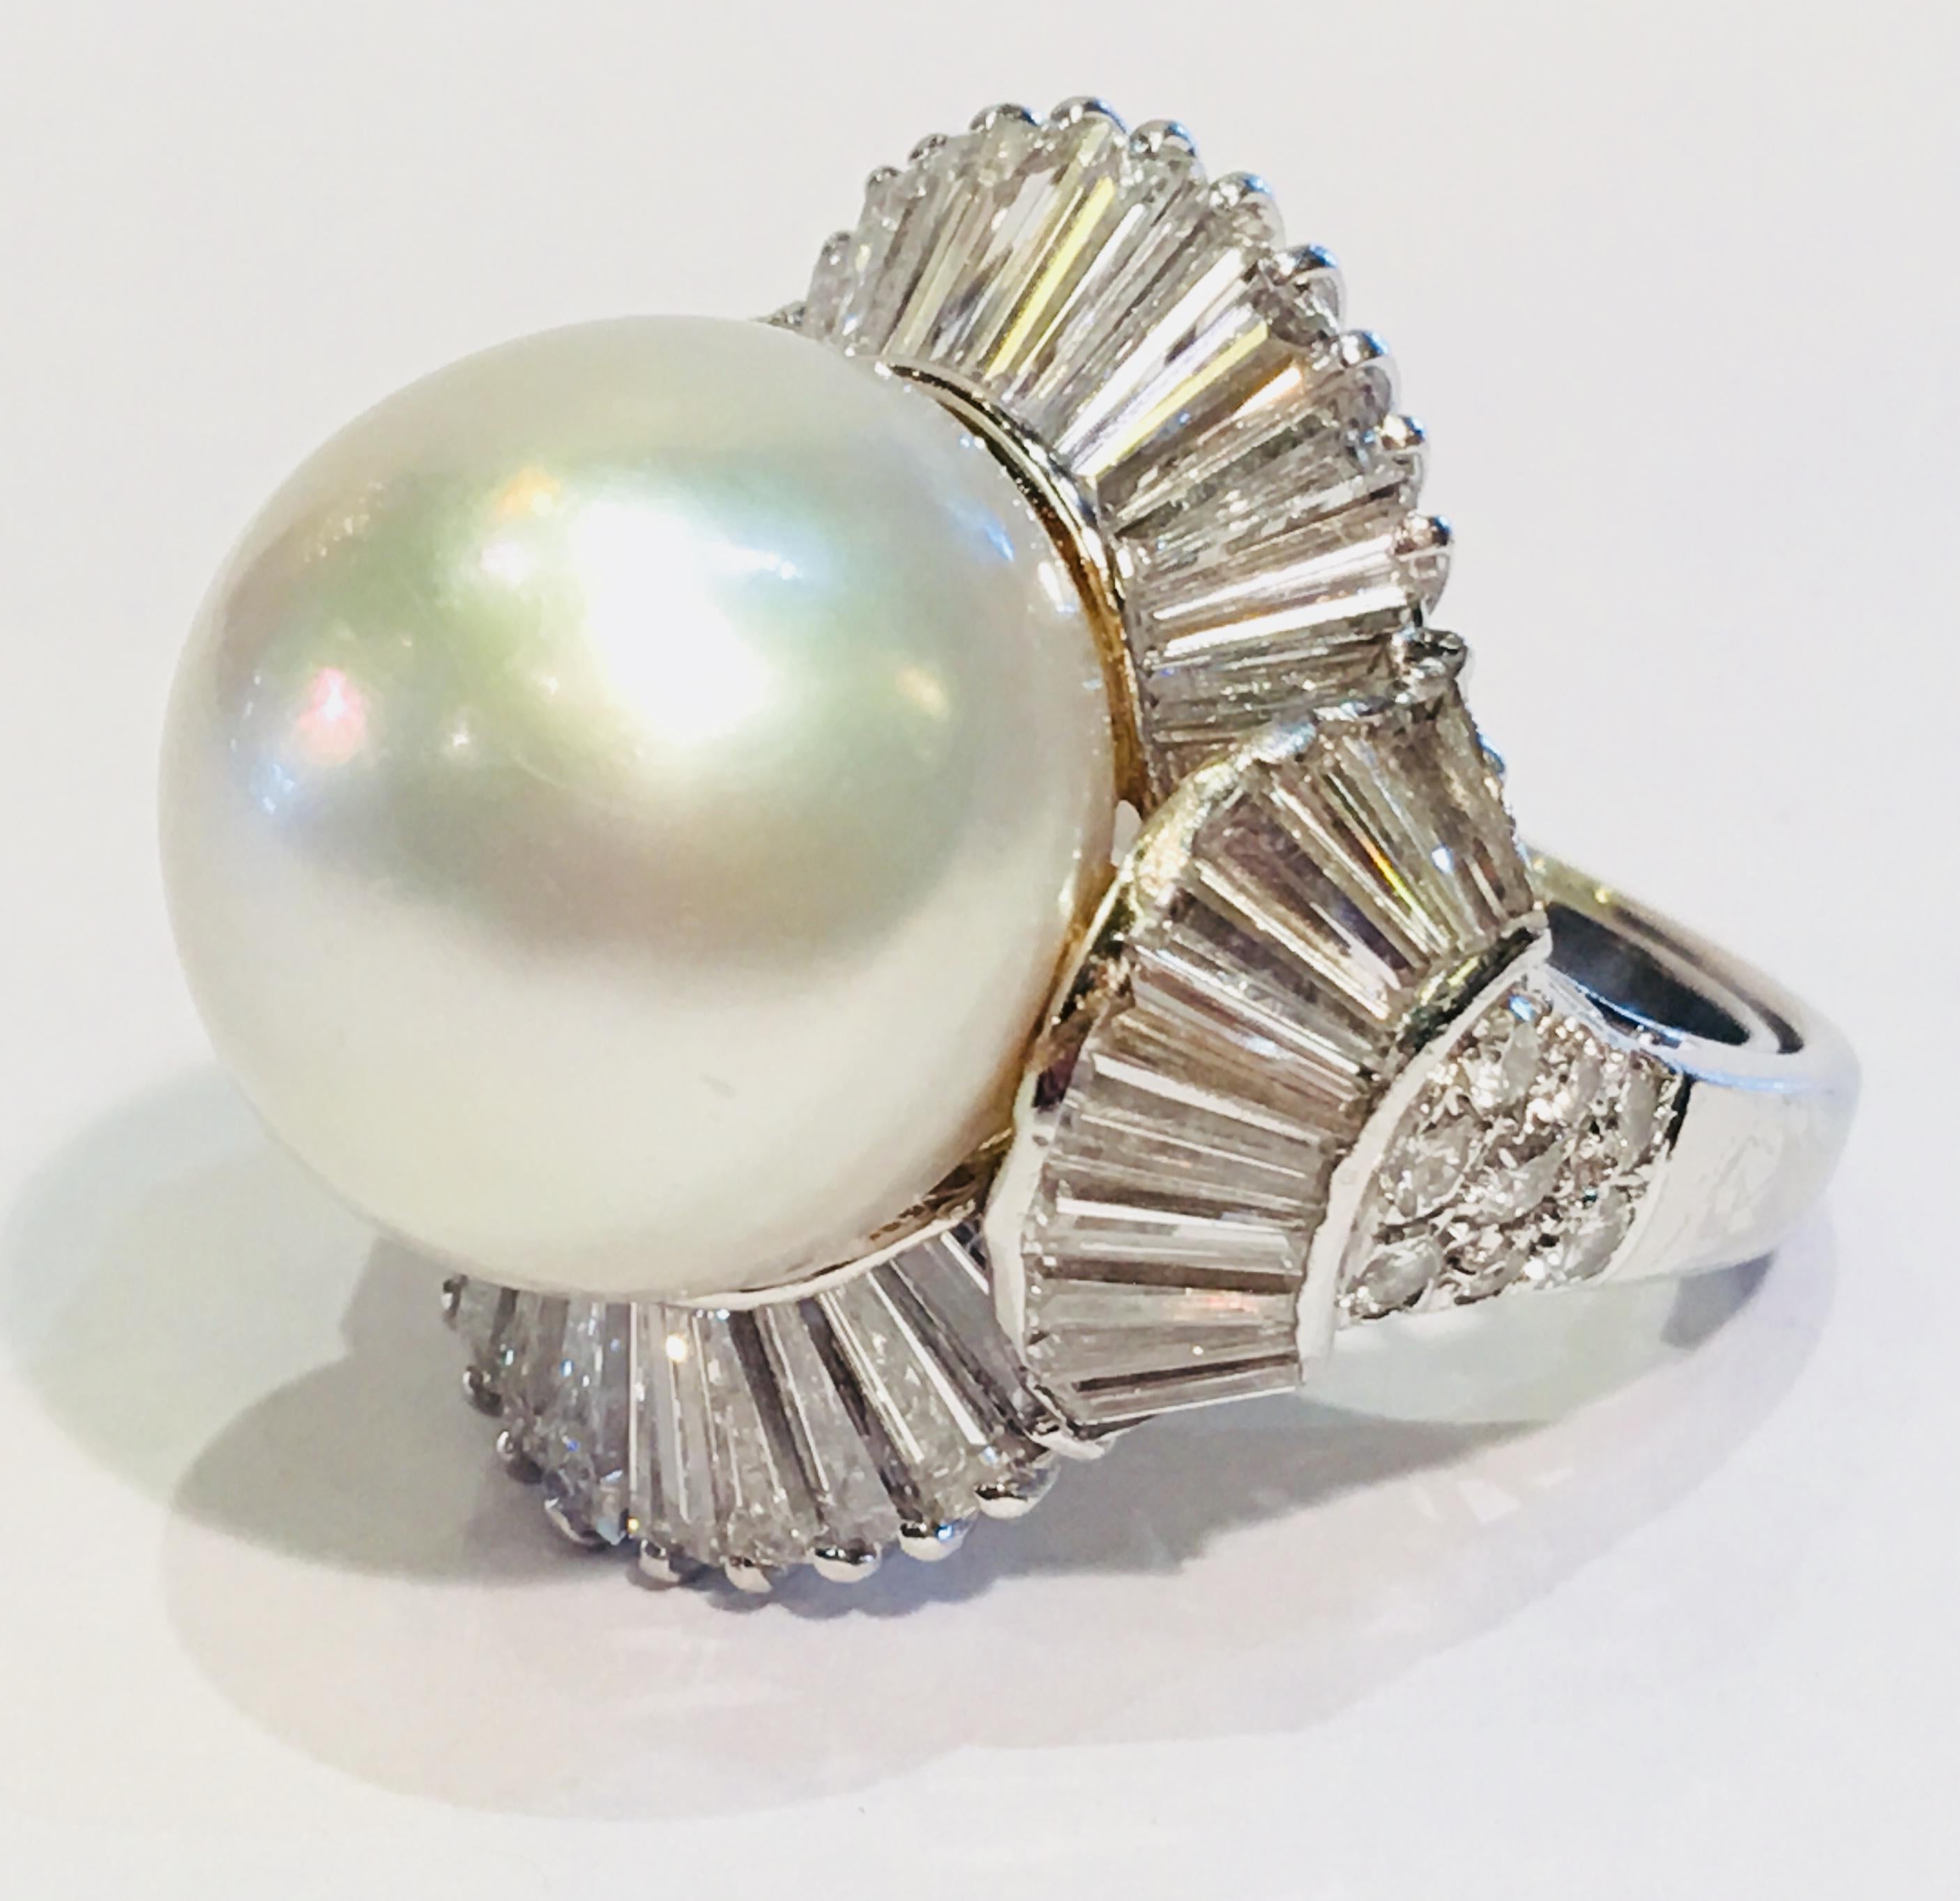 Magnificent very large single round 15.2 mm white South Sea pearl, with high luster and shine, is surrounded by 40 prong-set and invisibly set tapered diamond baguettes and accented with 16 round brilliant pave set diamonds in an 18 karat white gold